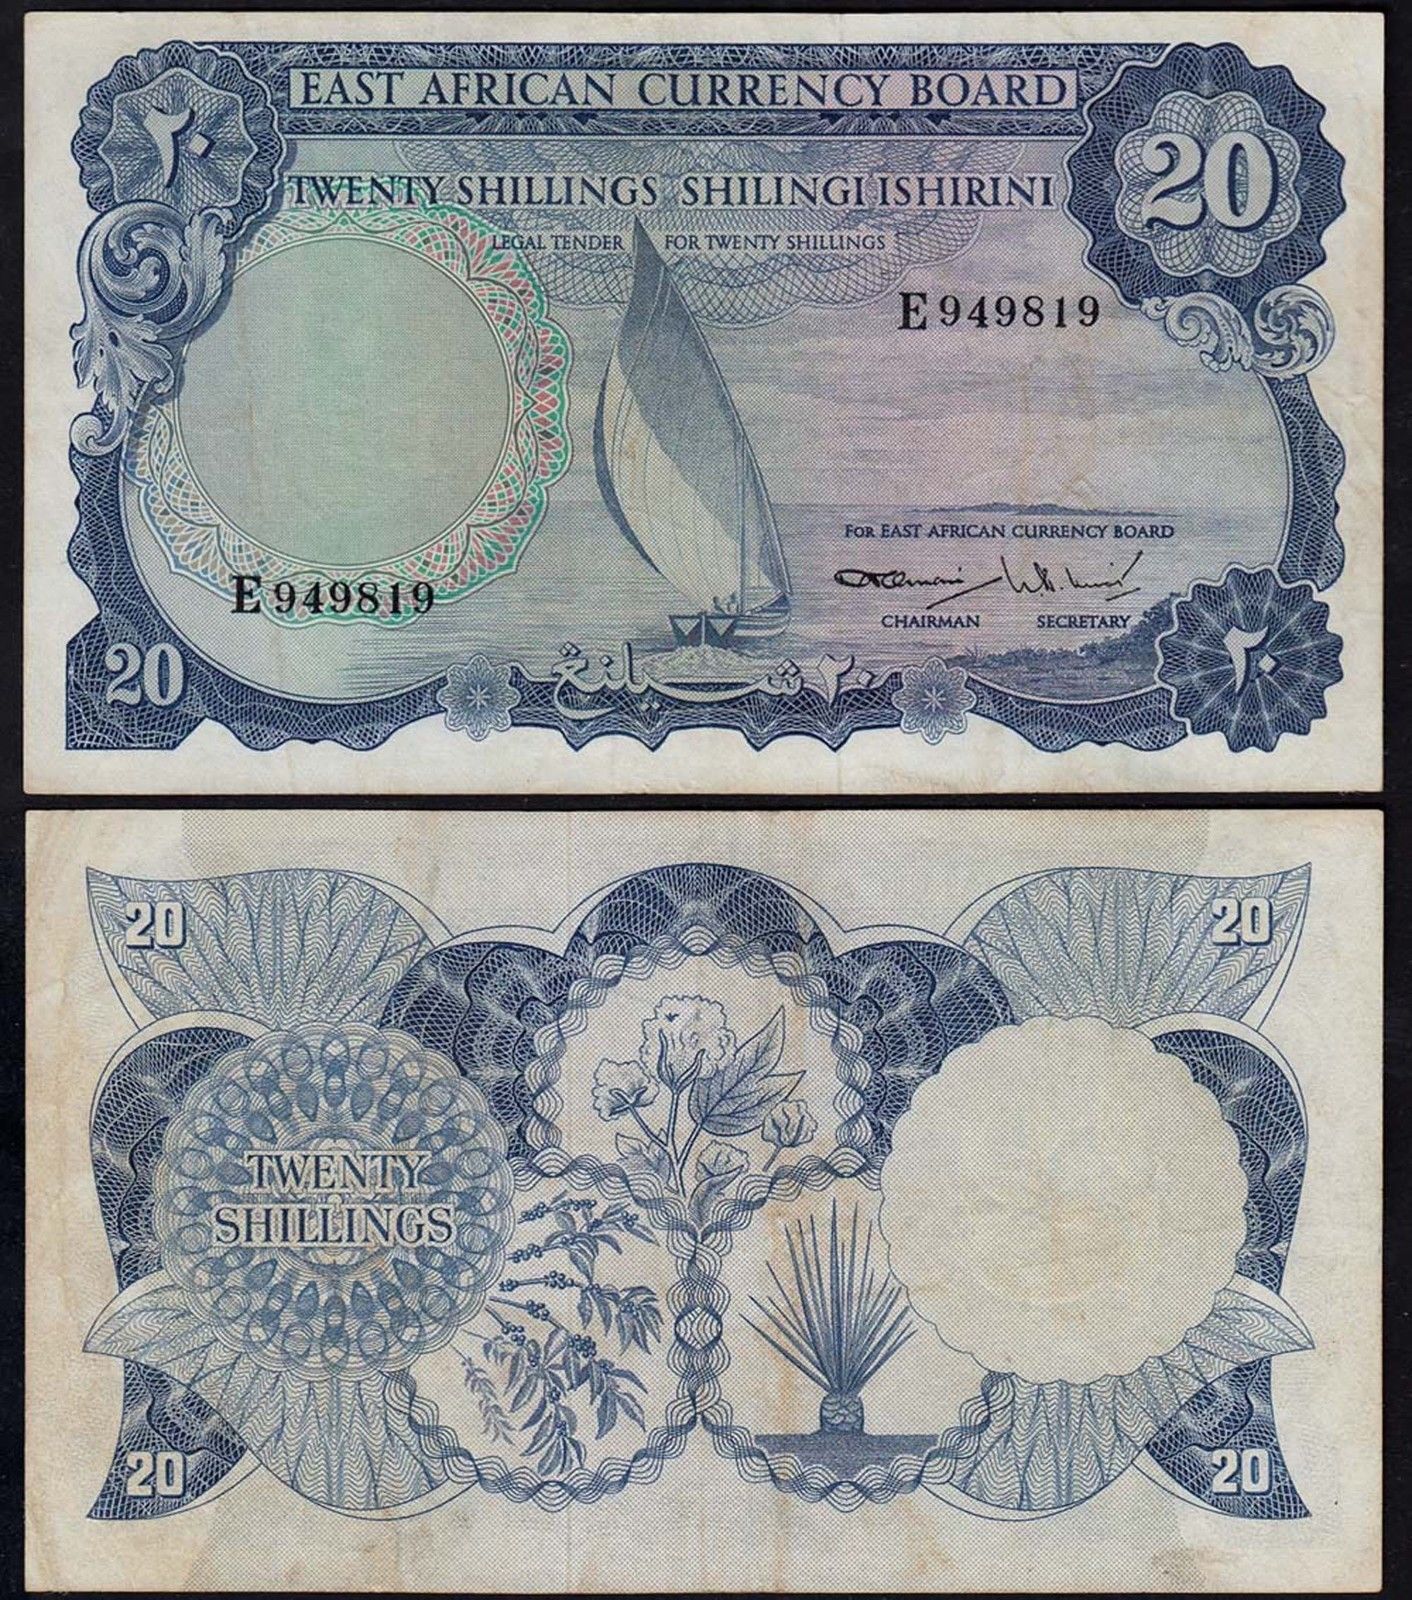 Lake Issue Currency